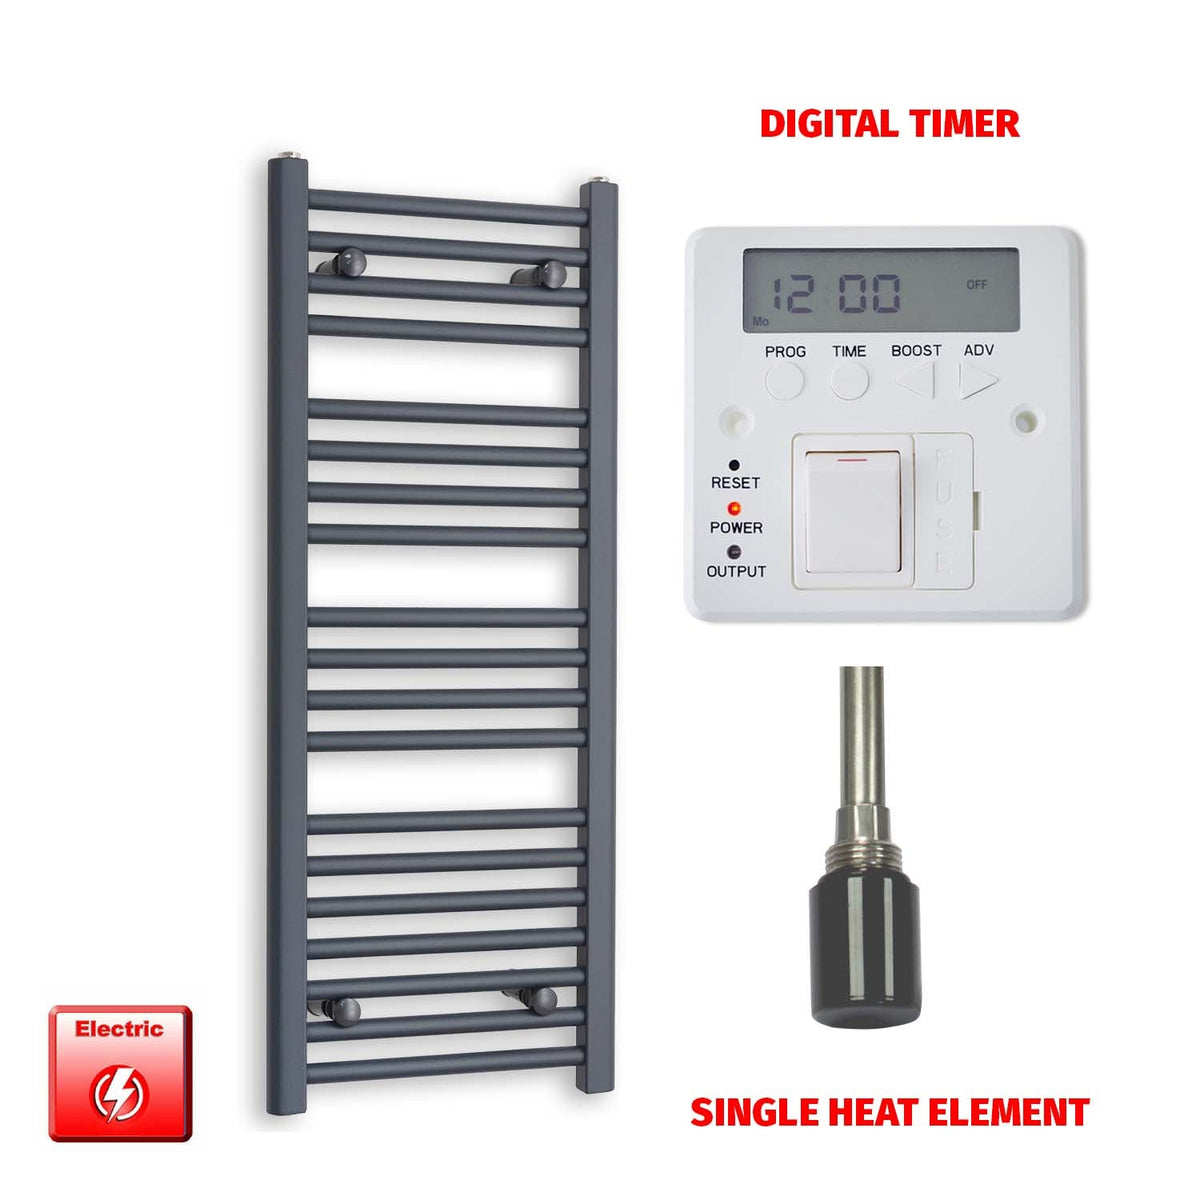 1000 x 400 Flat Anthracite Pre-Filled Electric Heated Towel Radiator HTR Single heat element Digital timer